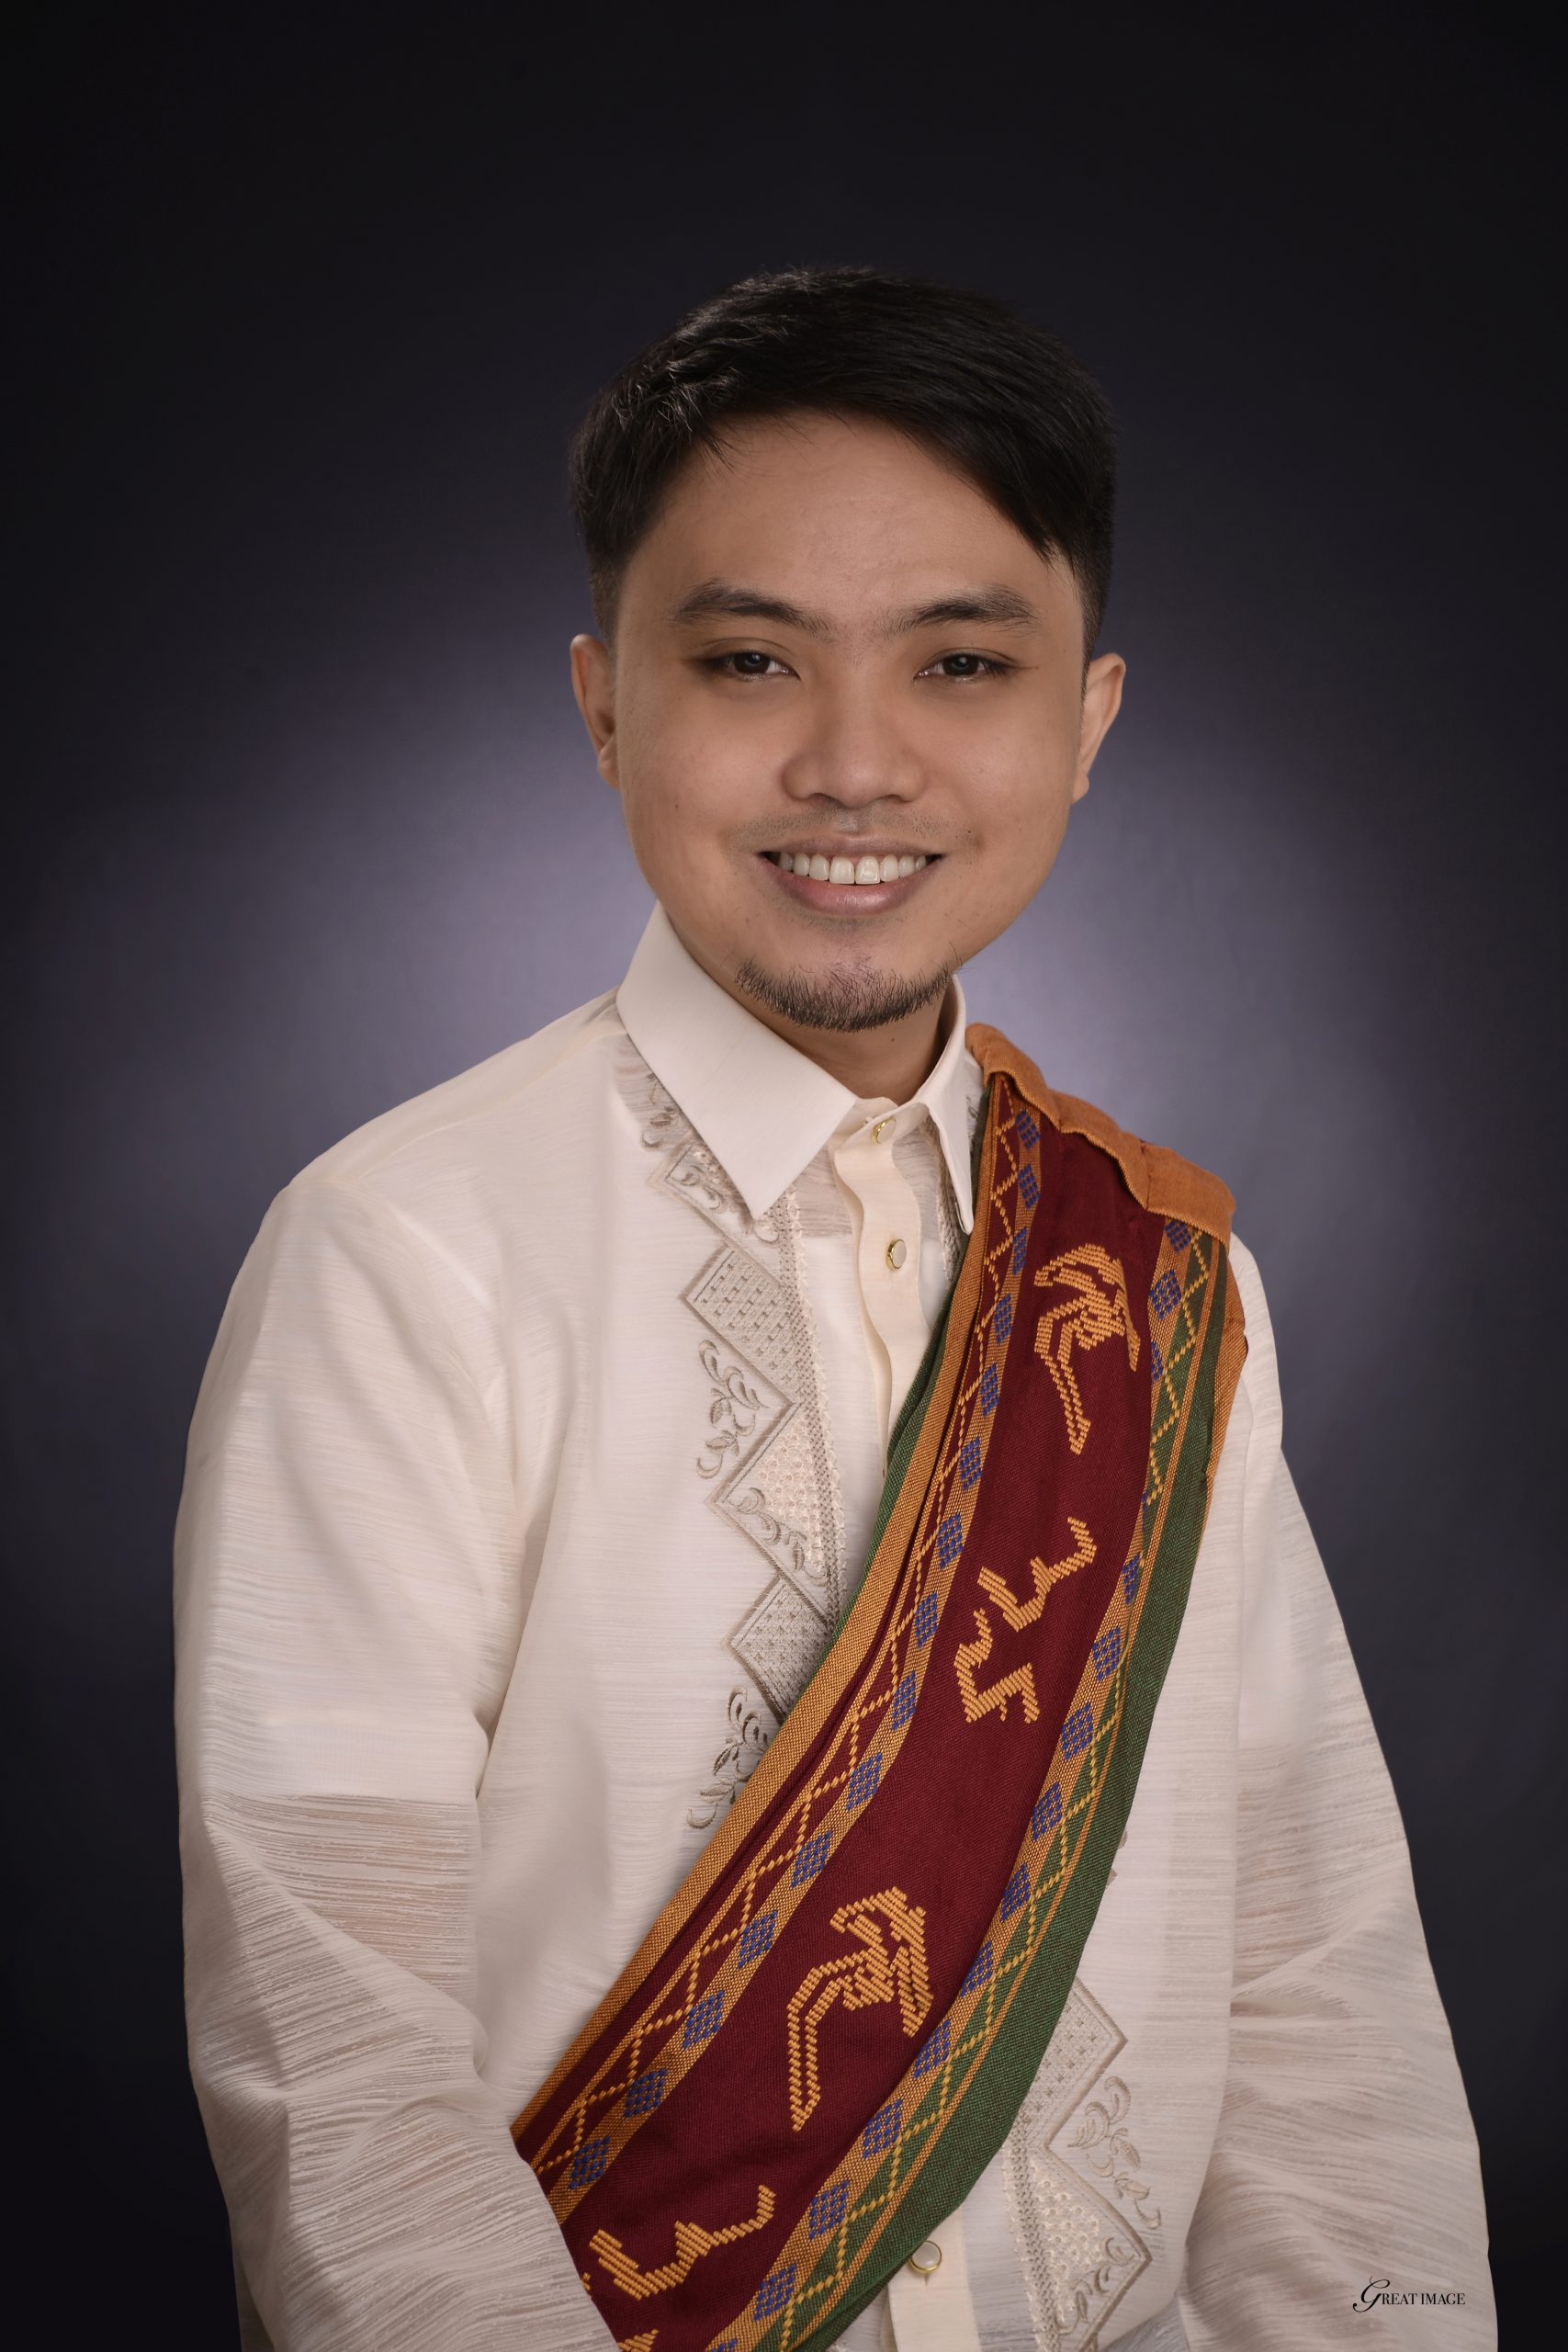 Health and Liaison Officer 2 - MANALANG, JO JERICO